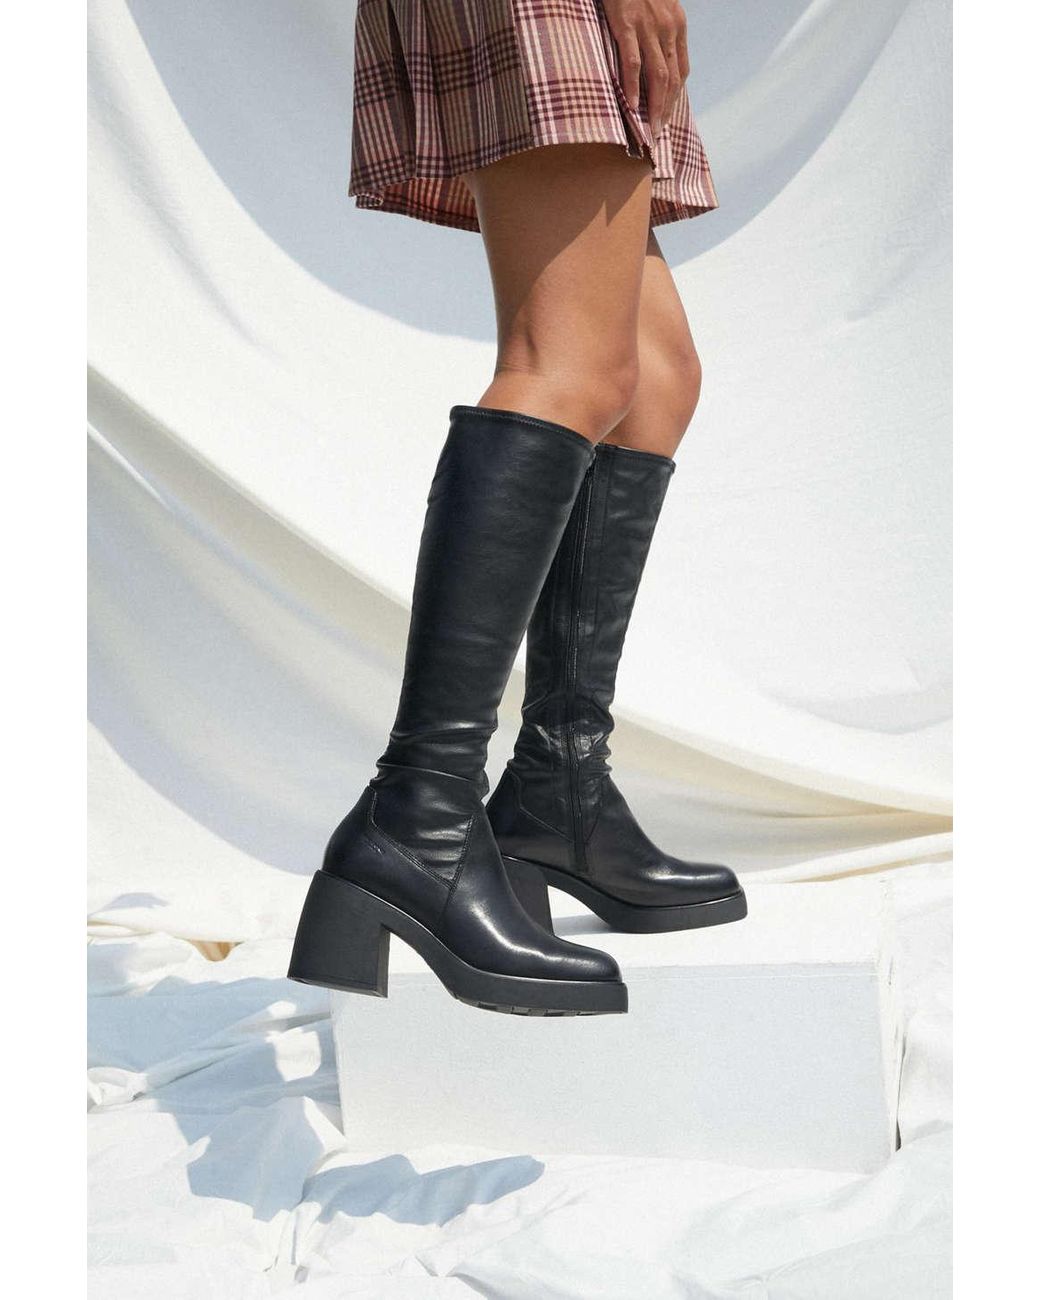 Vagabond Shoemakers Brooke Knee-high Boot in Black | Lyst Canada